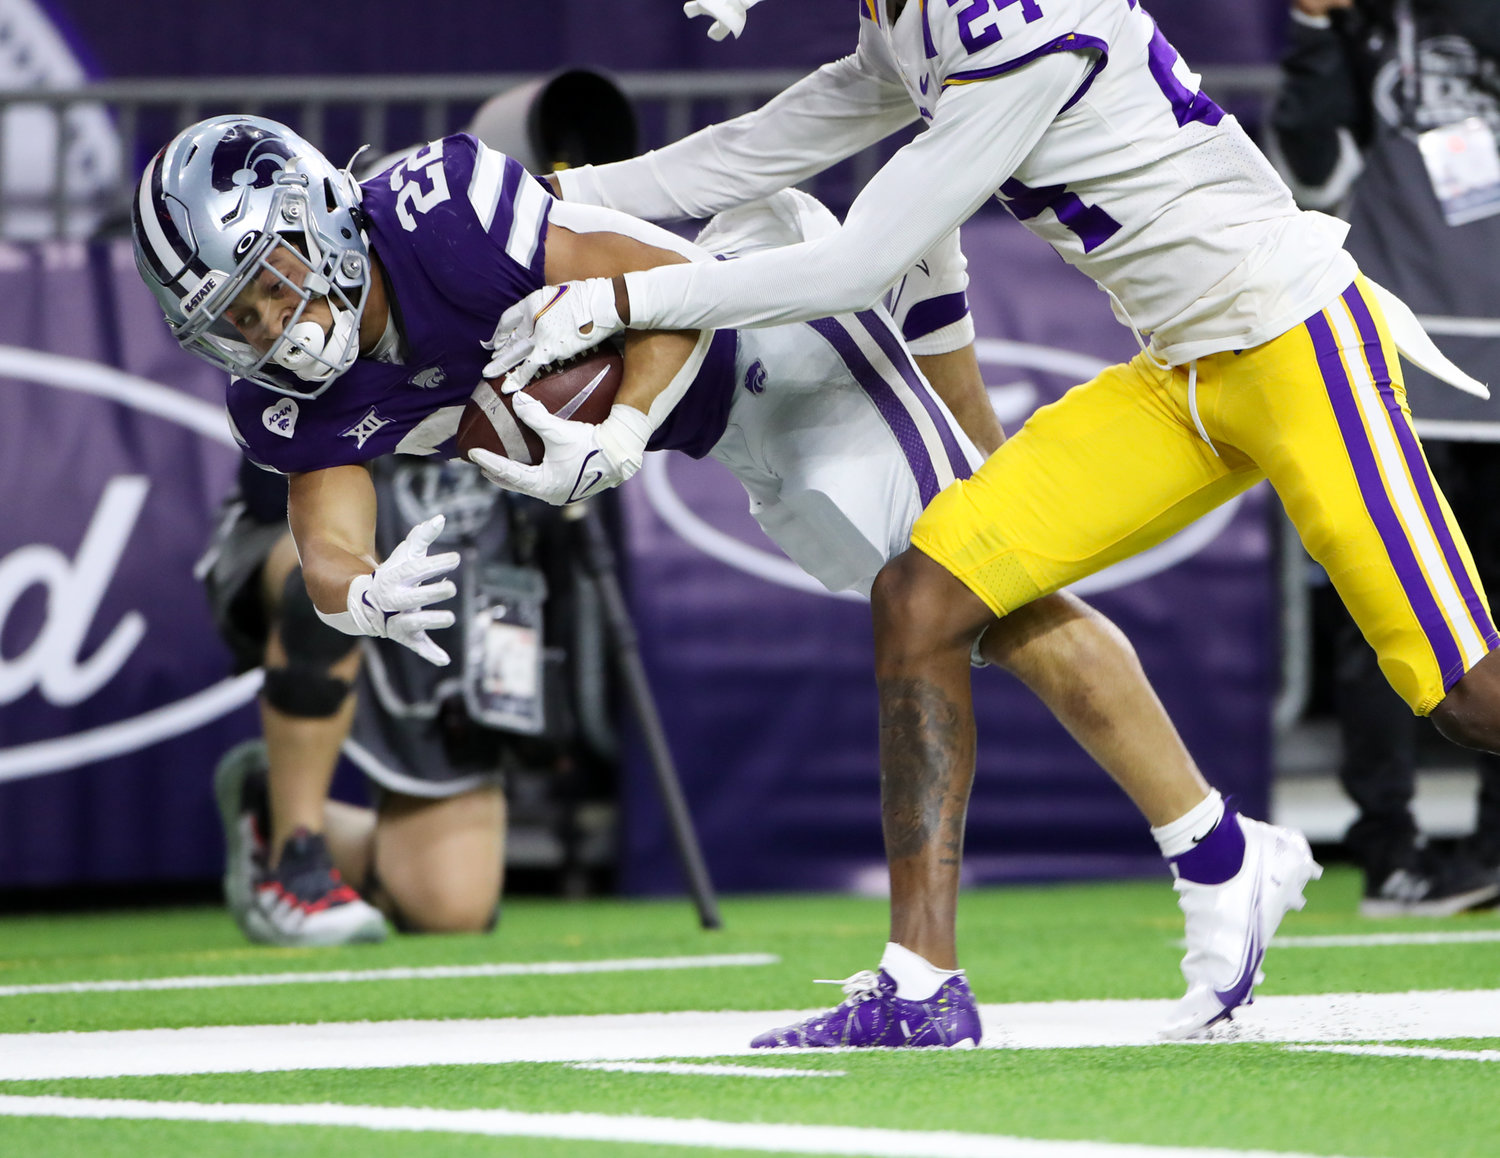 Kansas State Wildcats running back Deuce Vaughn (22) carries the ball down inside the 1-yard line during the TaxAct Texas Bowl on Jan. 4, 2022 in Houston, Texas.